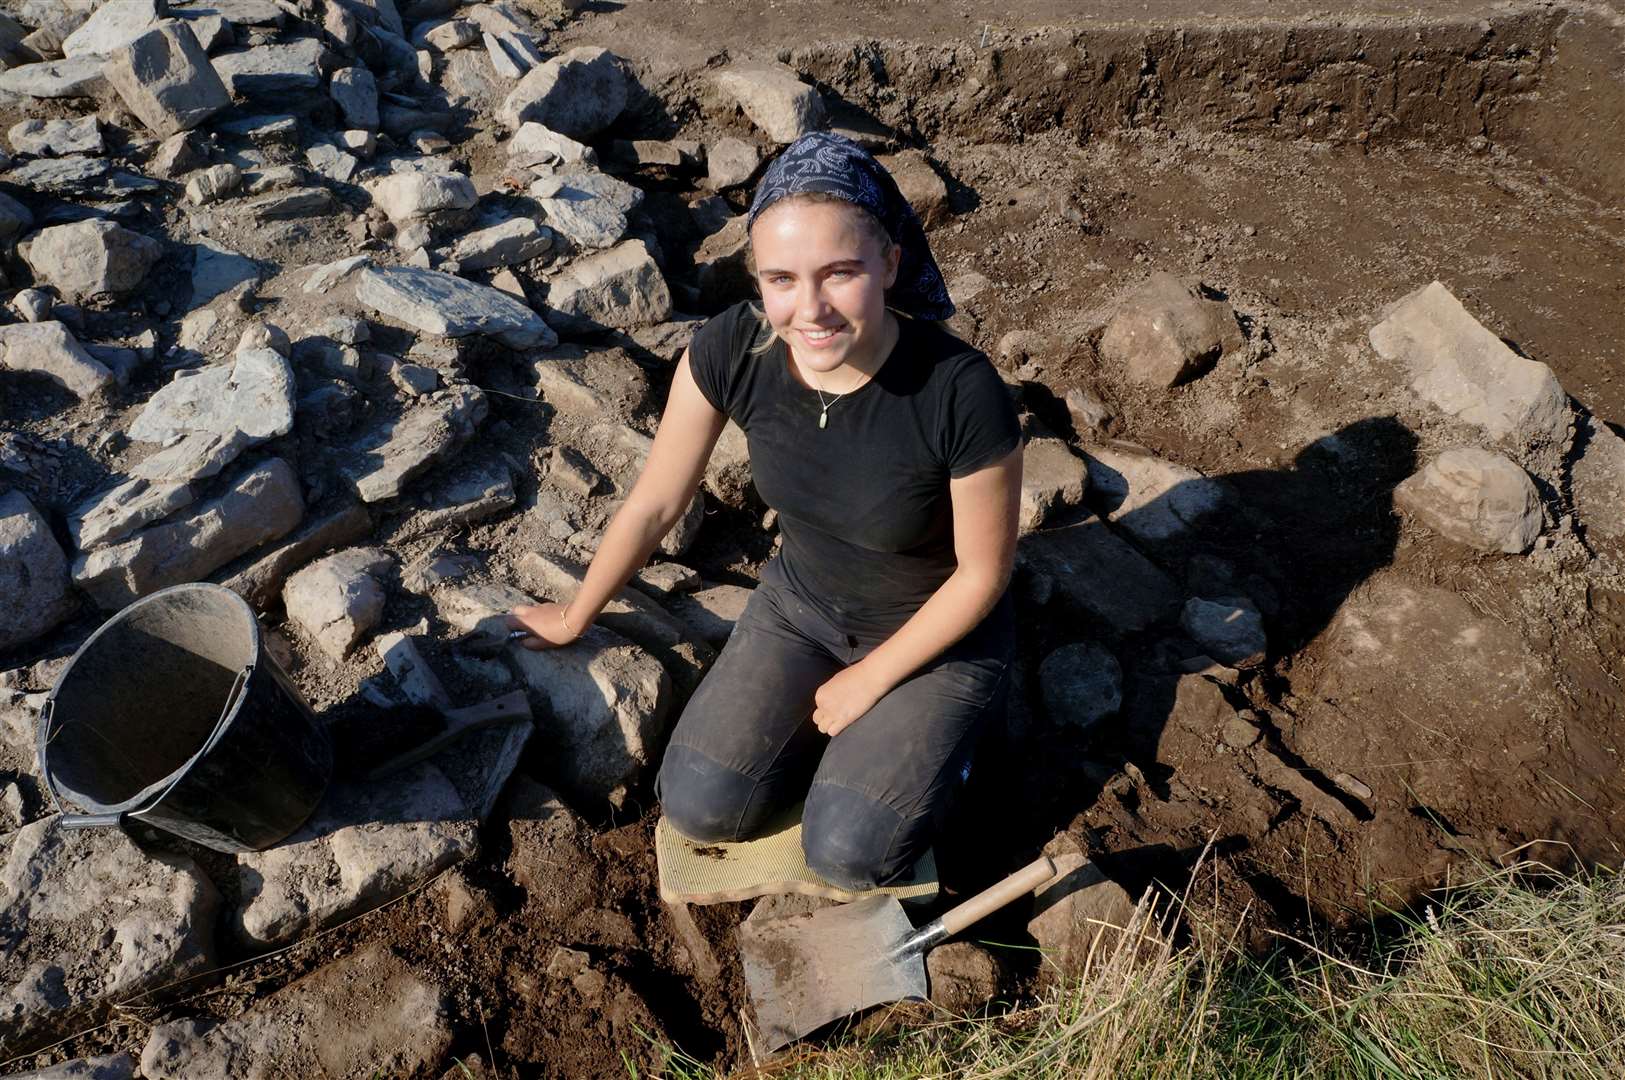 Iona Cargill is studying archaeology at Oxford University and volunteered her services for the Swartigill dig.